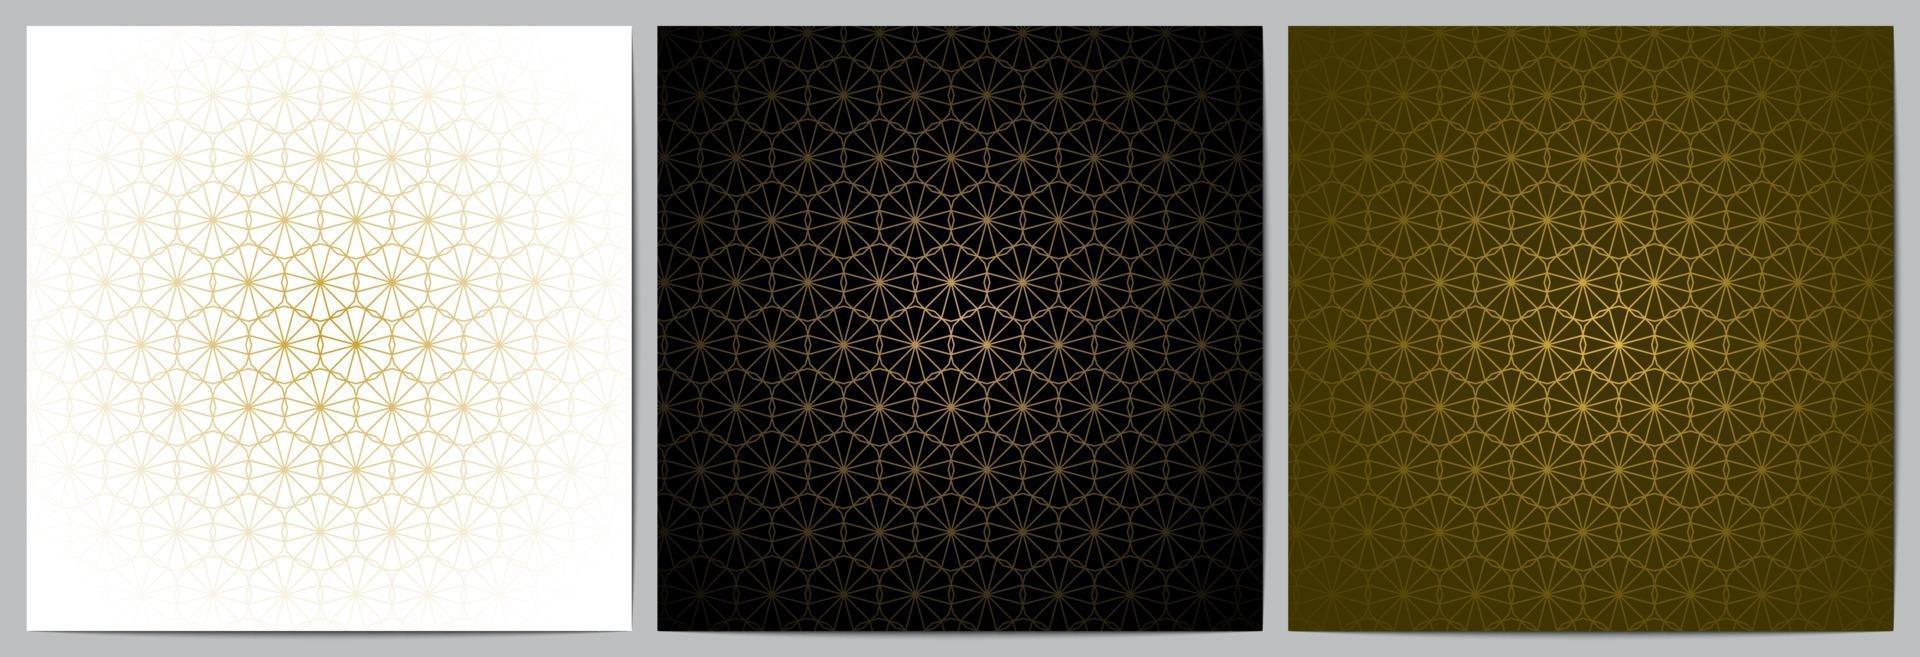 Geometric pattern with golden lines black,white,and gold background vector